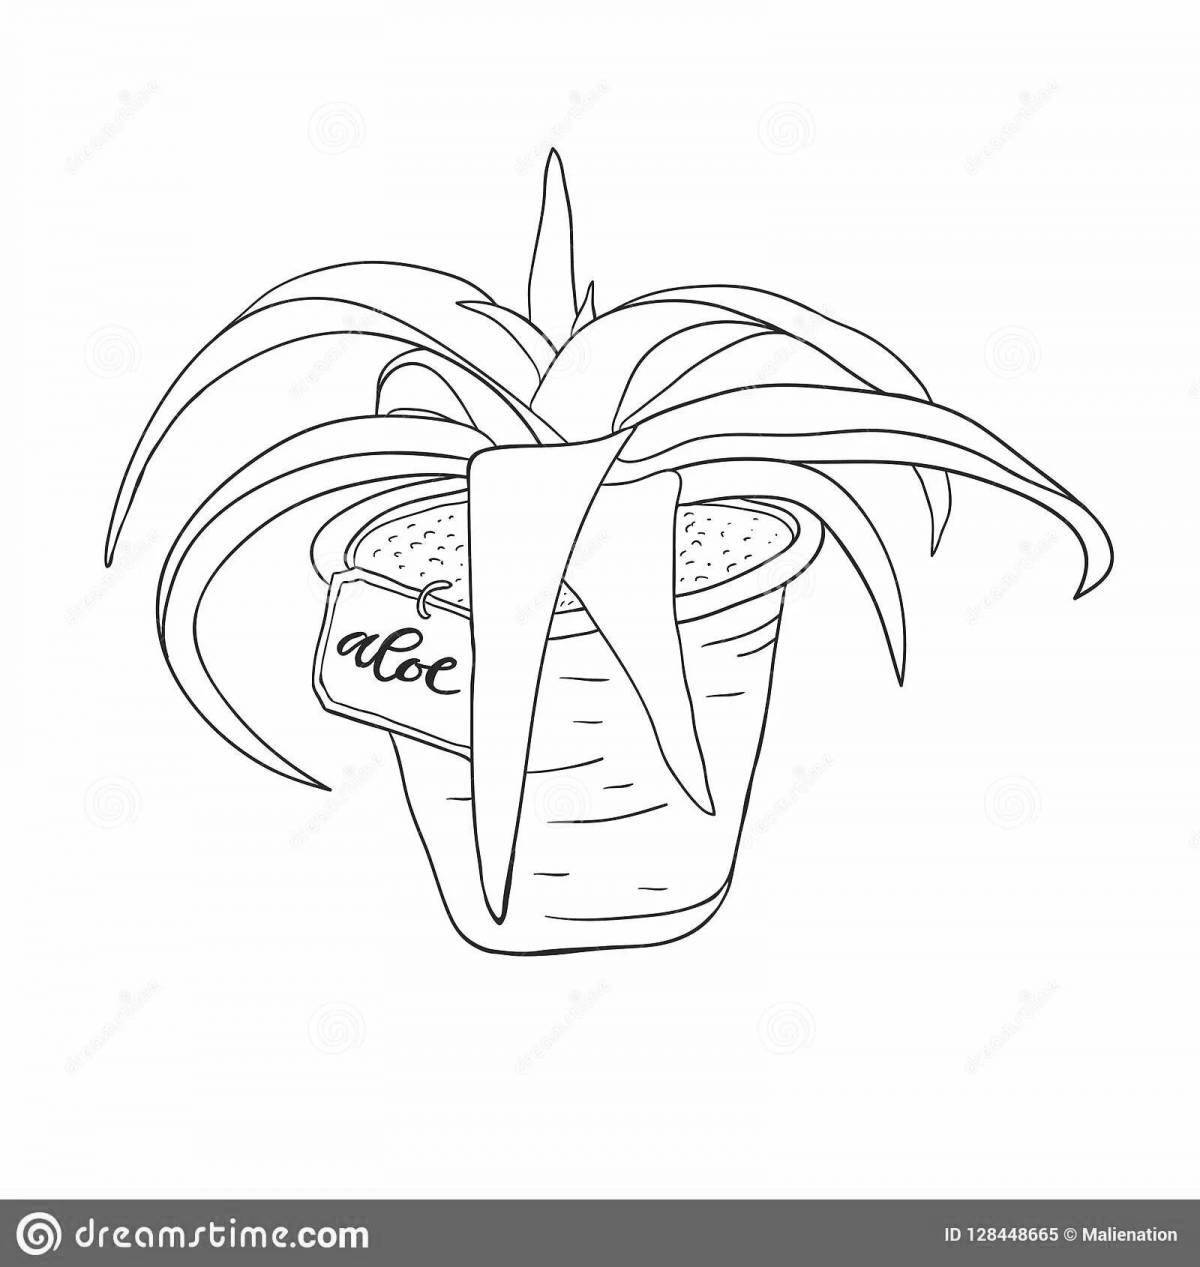 Colorful aloe coloring page for kids